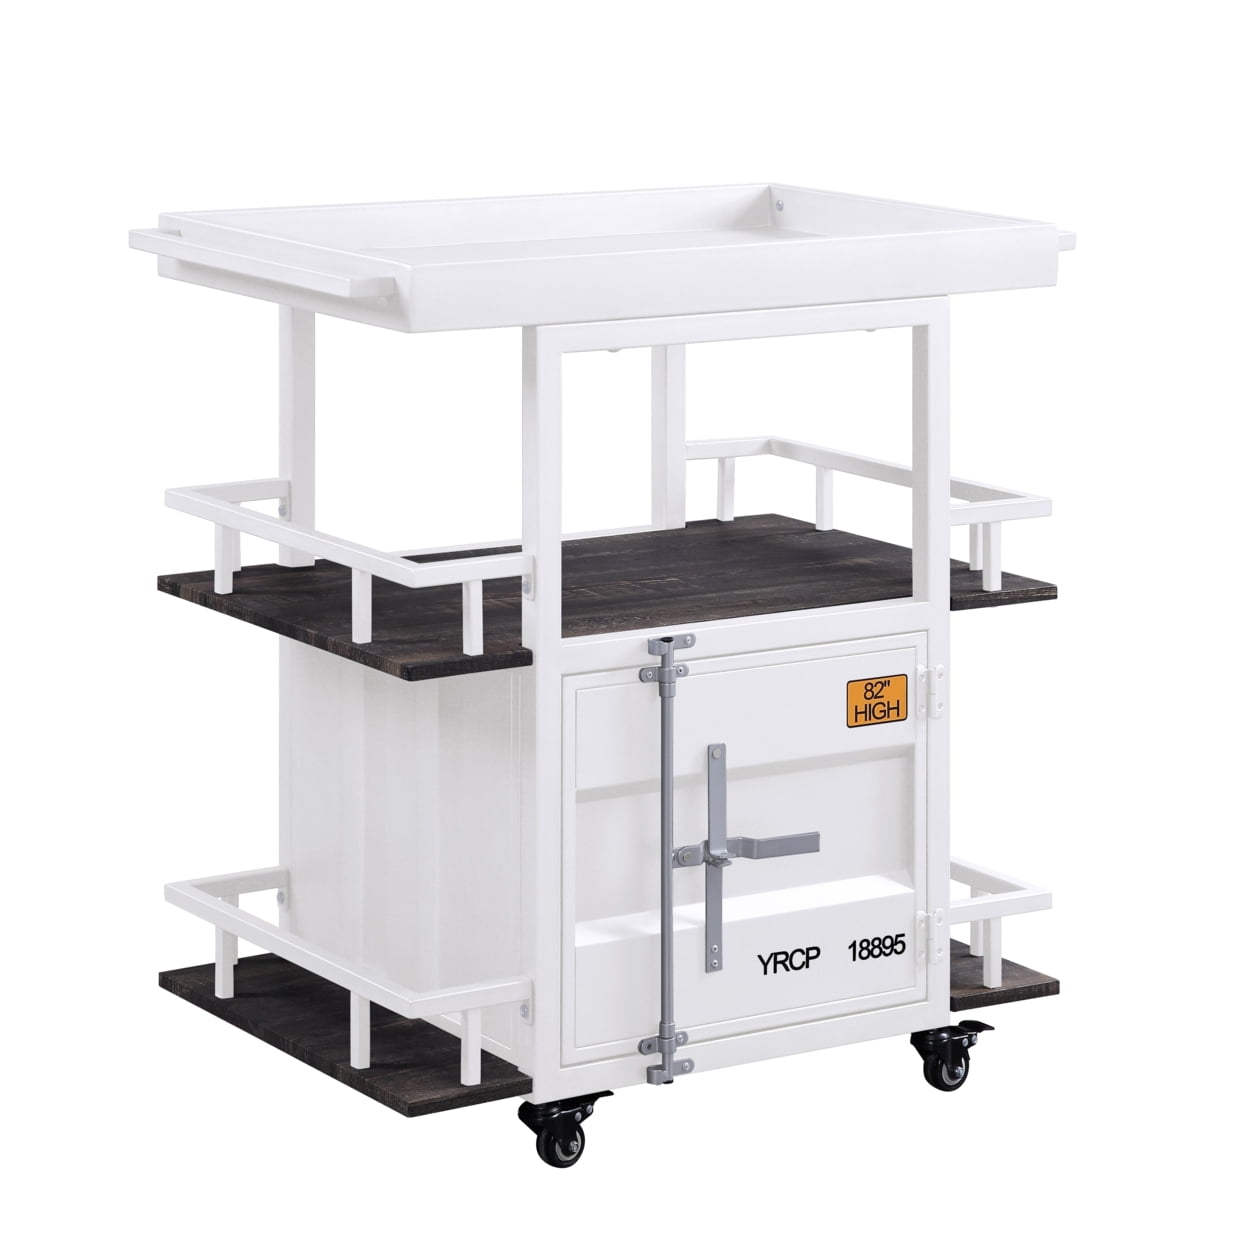 Picture of Benzara BM204485 Industrial Style Metal Serving Cart with Casters, White